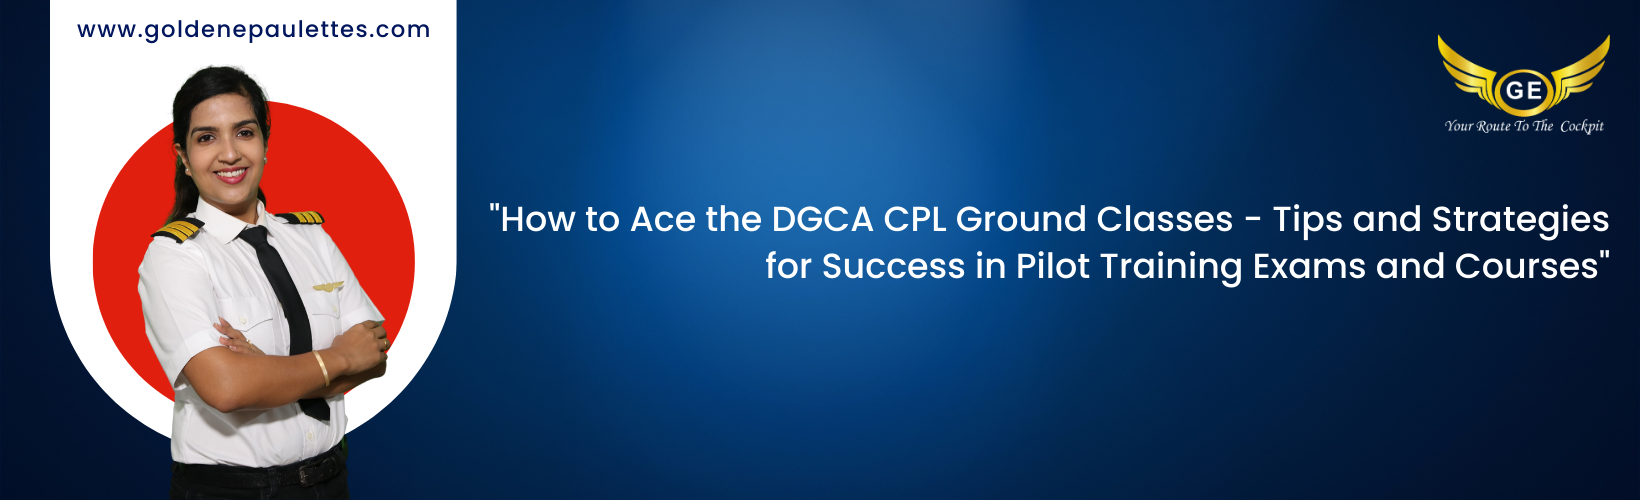 Tips for Passing the DGCA CPL Ground Classes